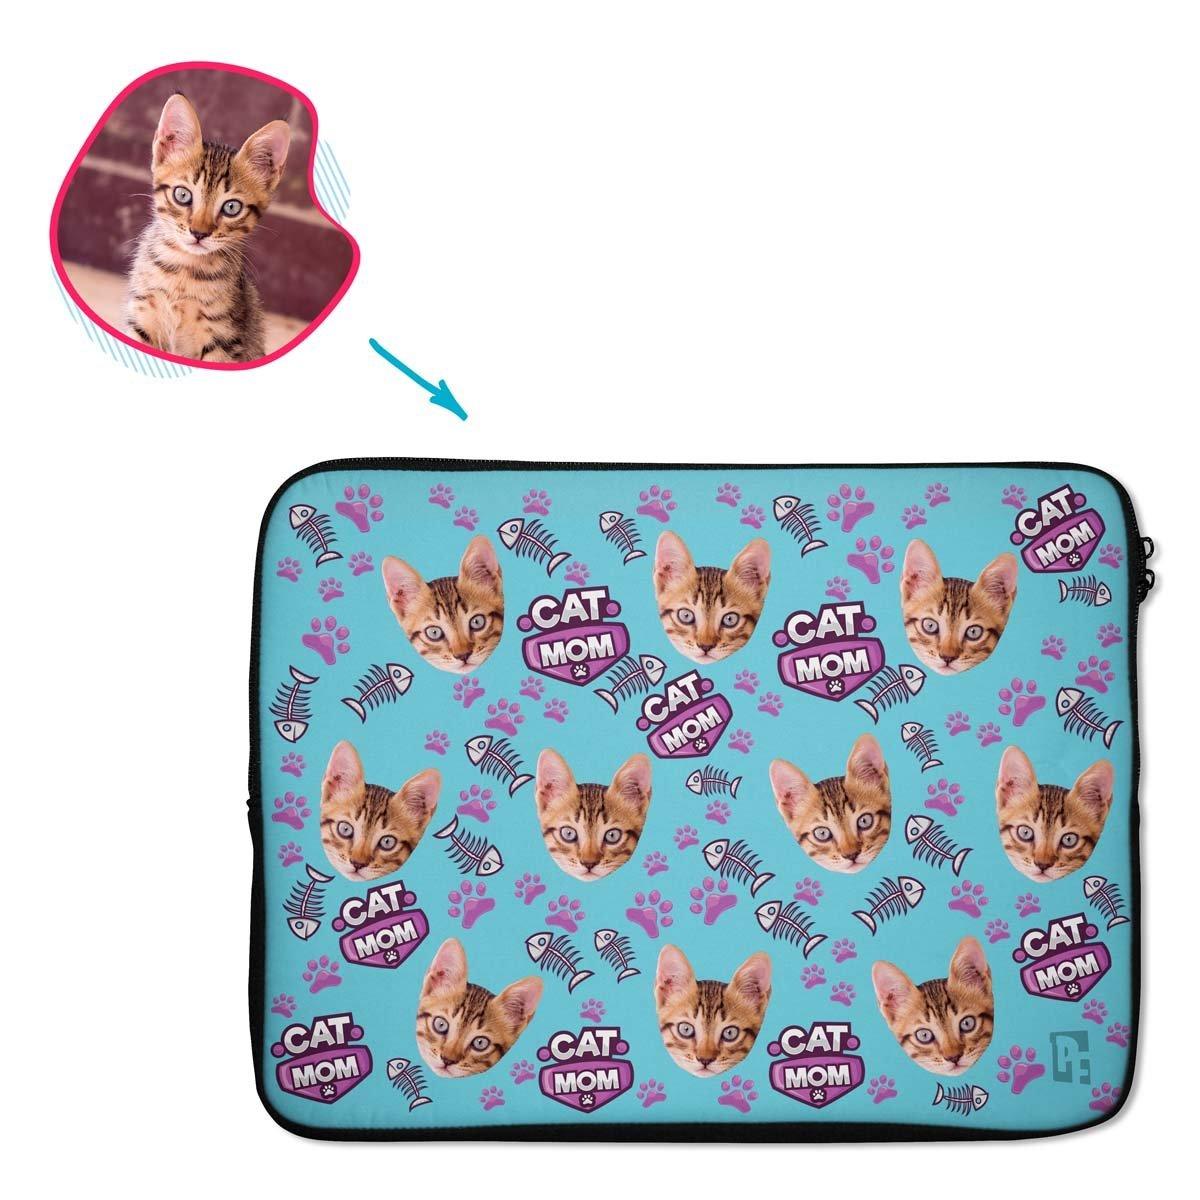 blue Cat Mom laptop sleeve personalized with photo of face printed on them